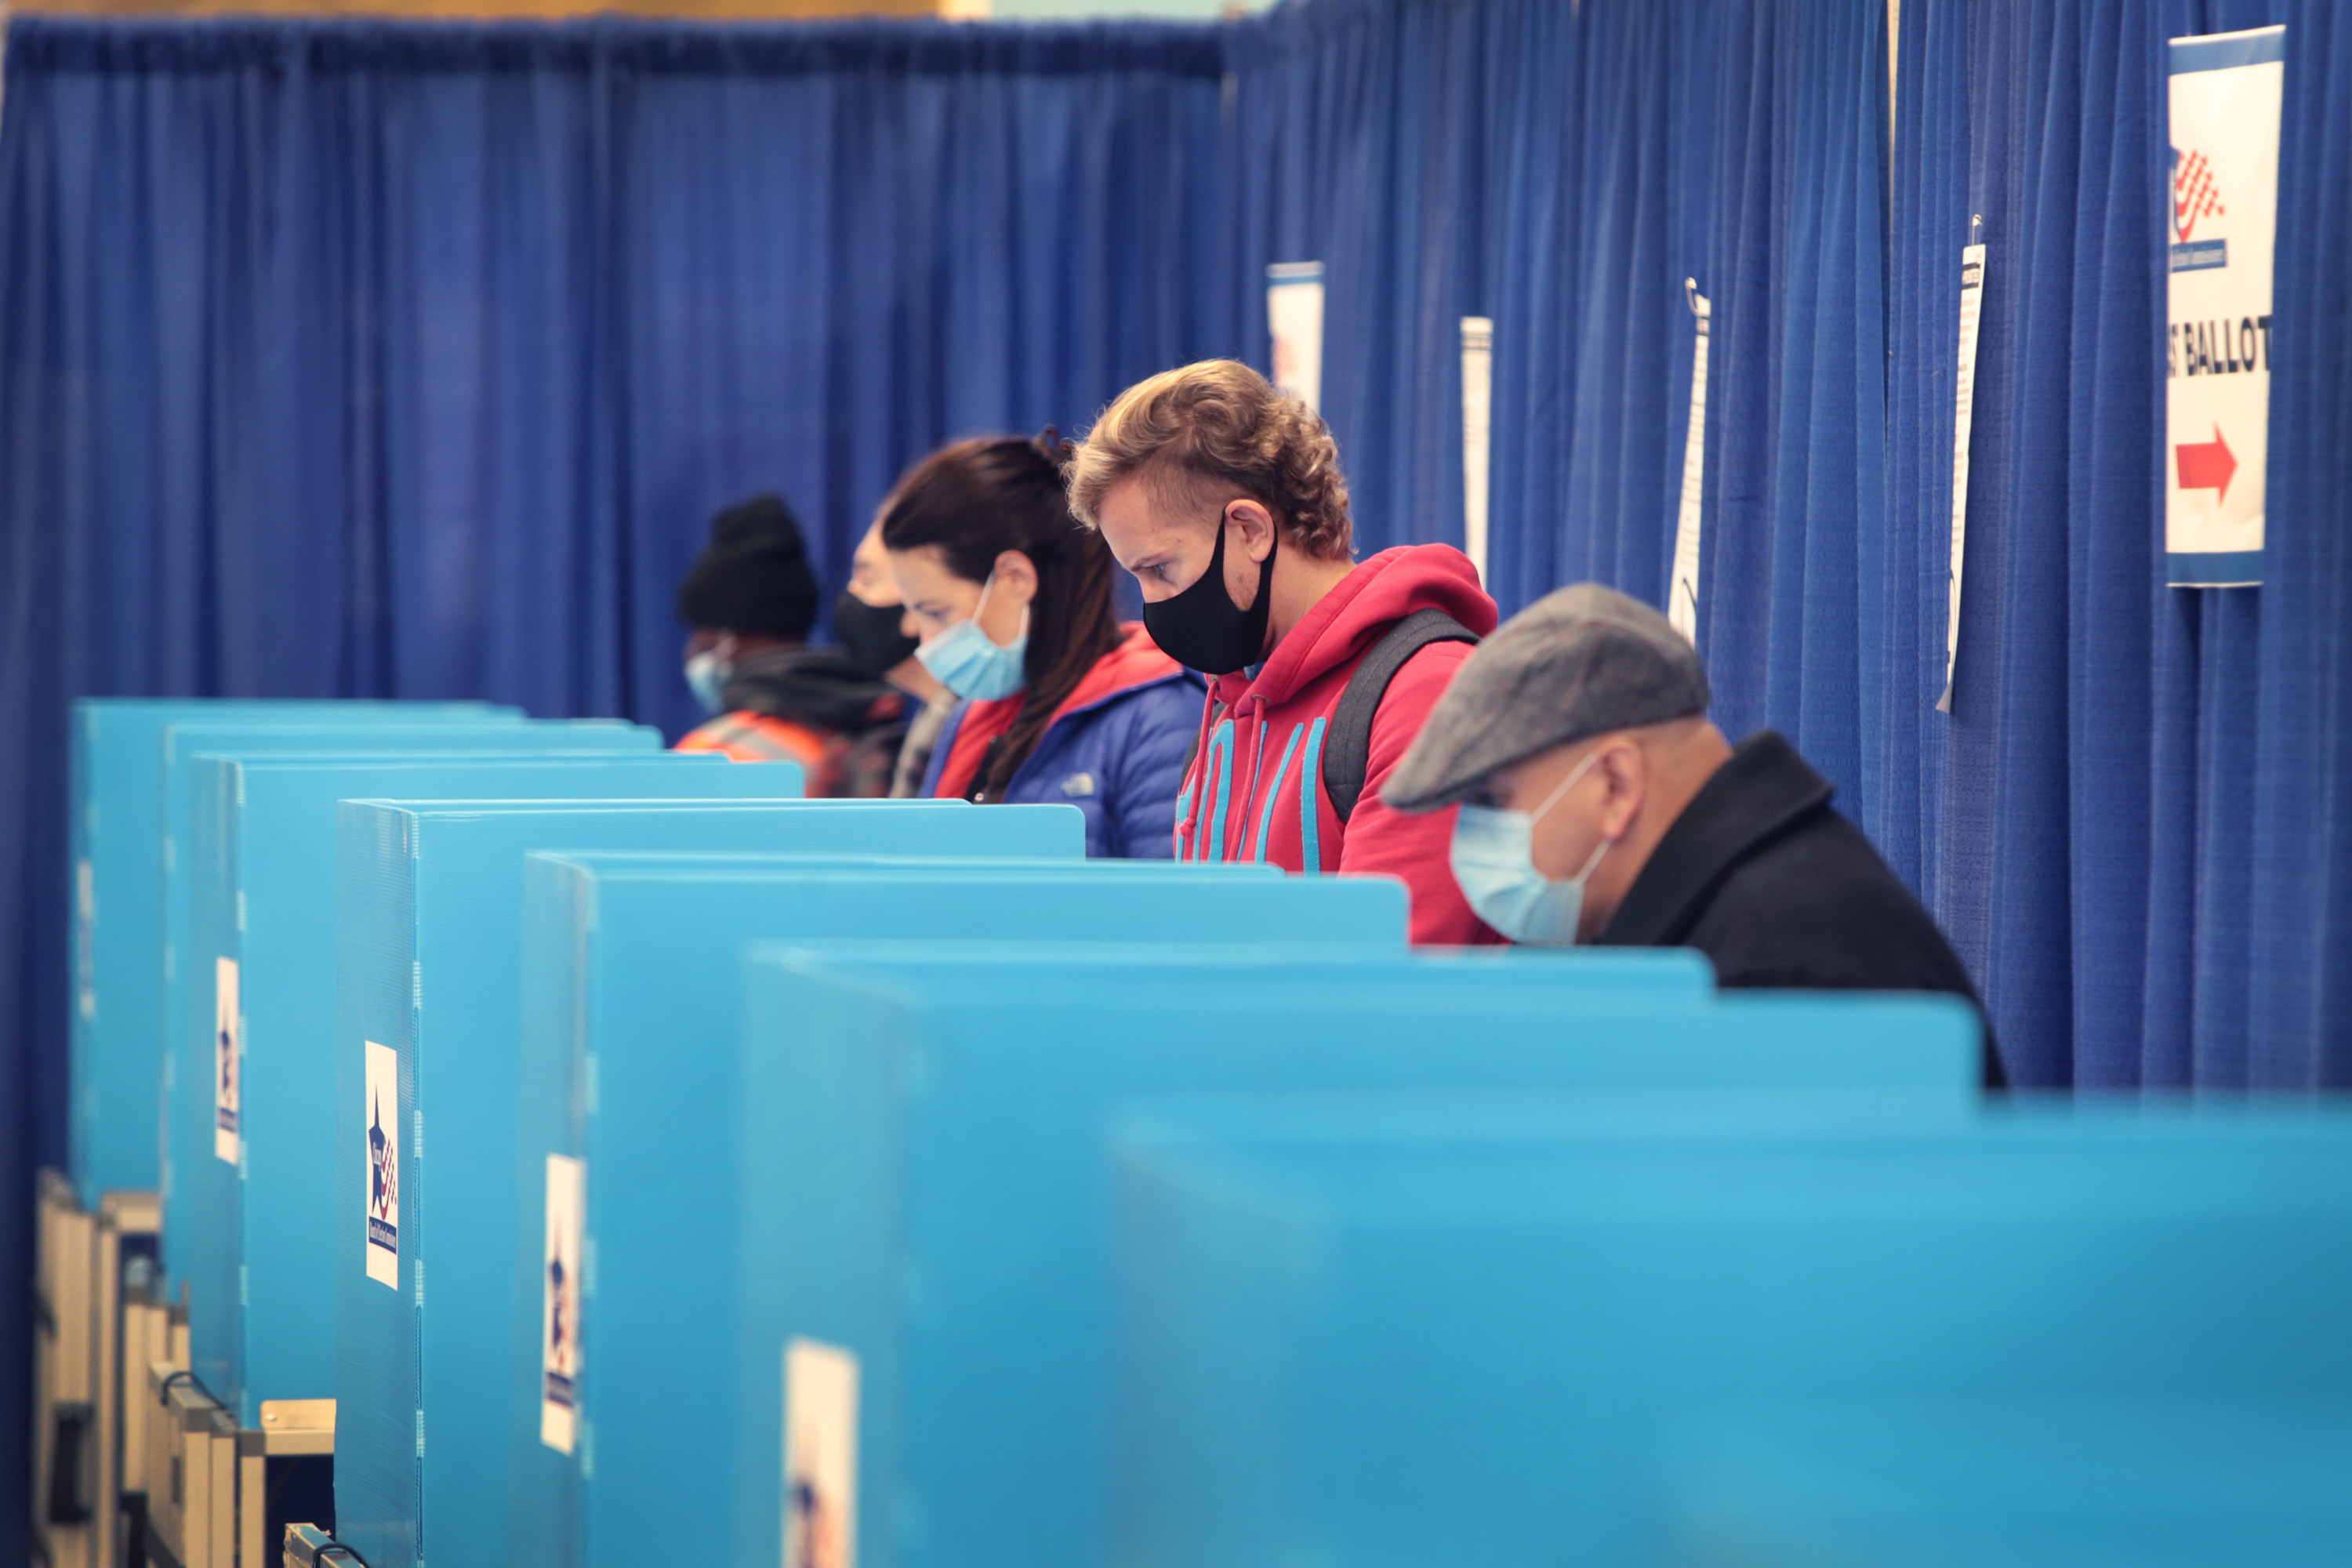 Chicago residents vote at an early voting site on October 2.